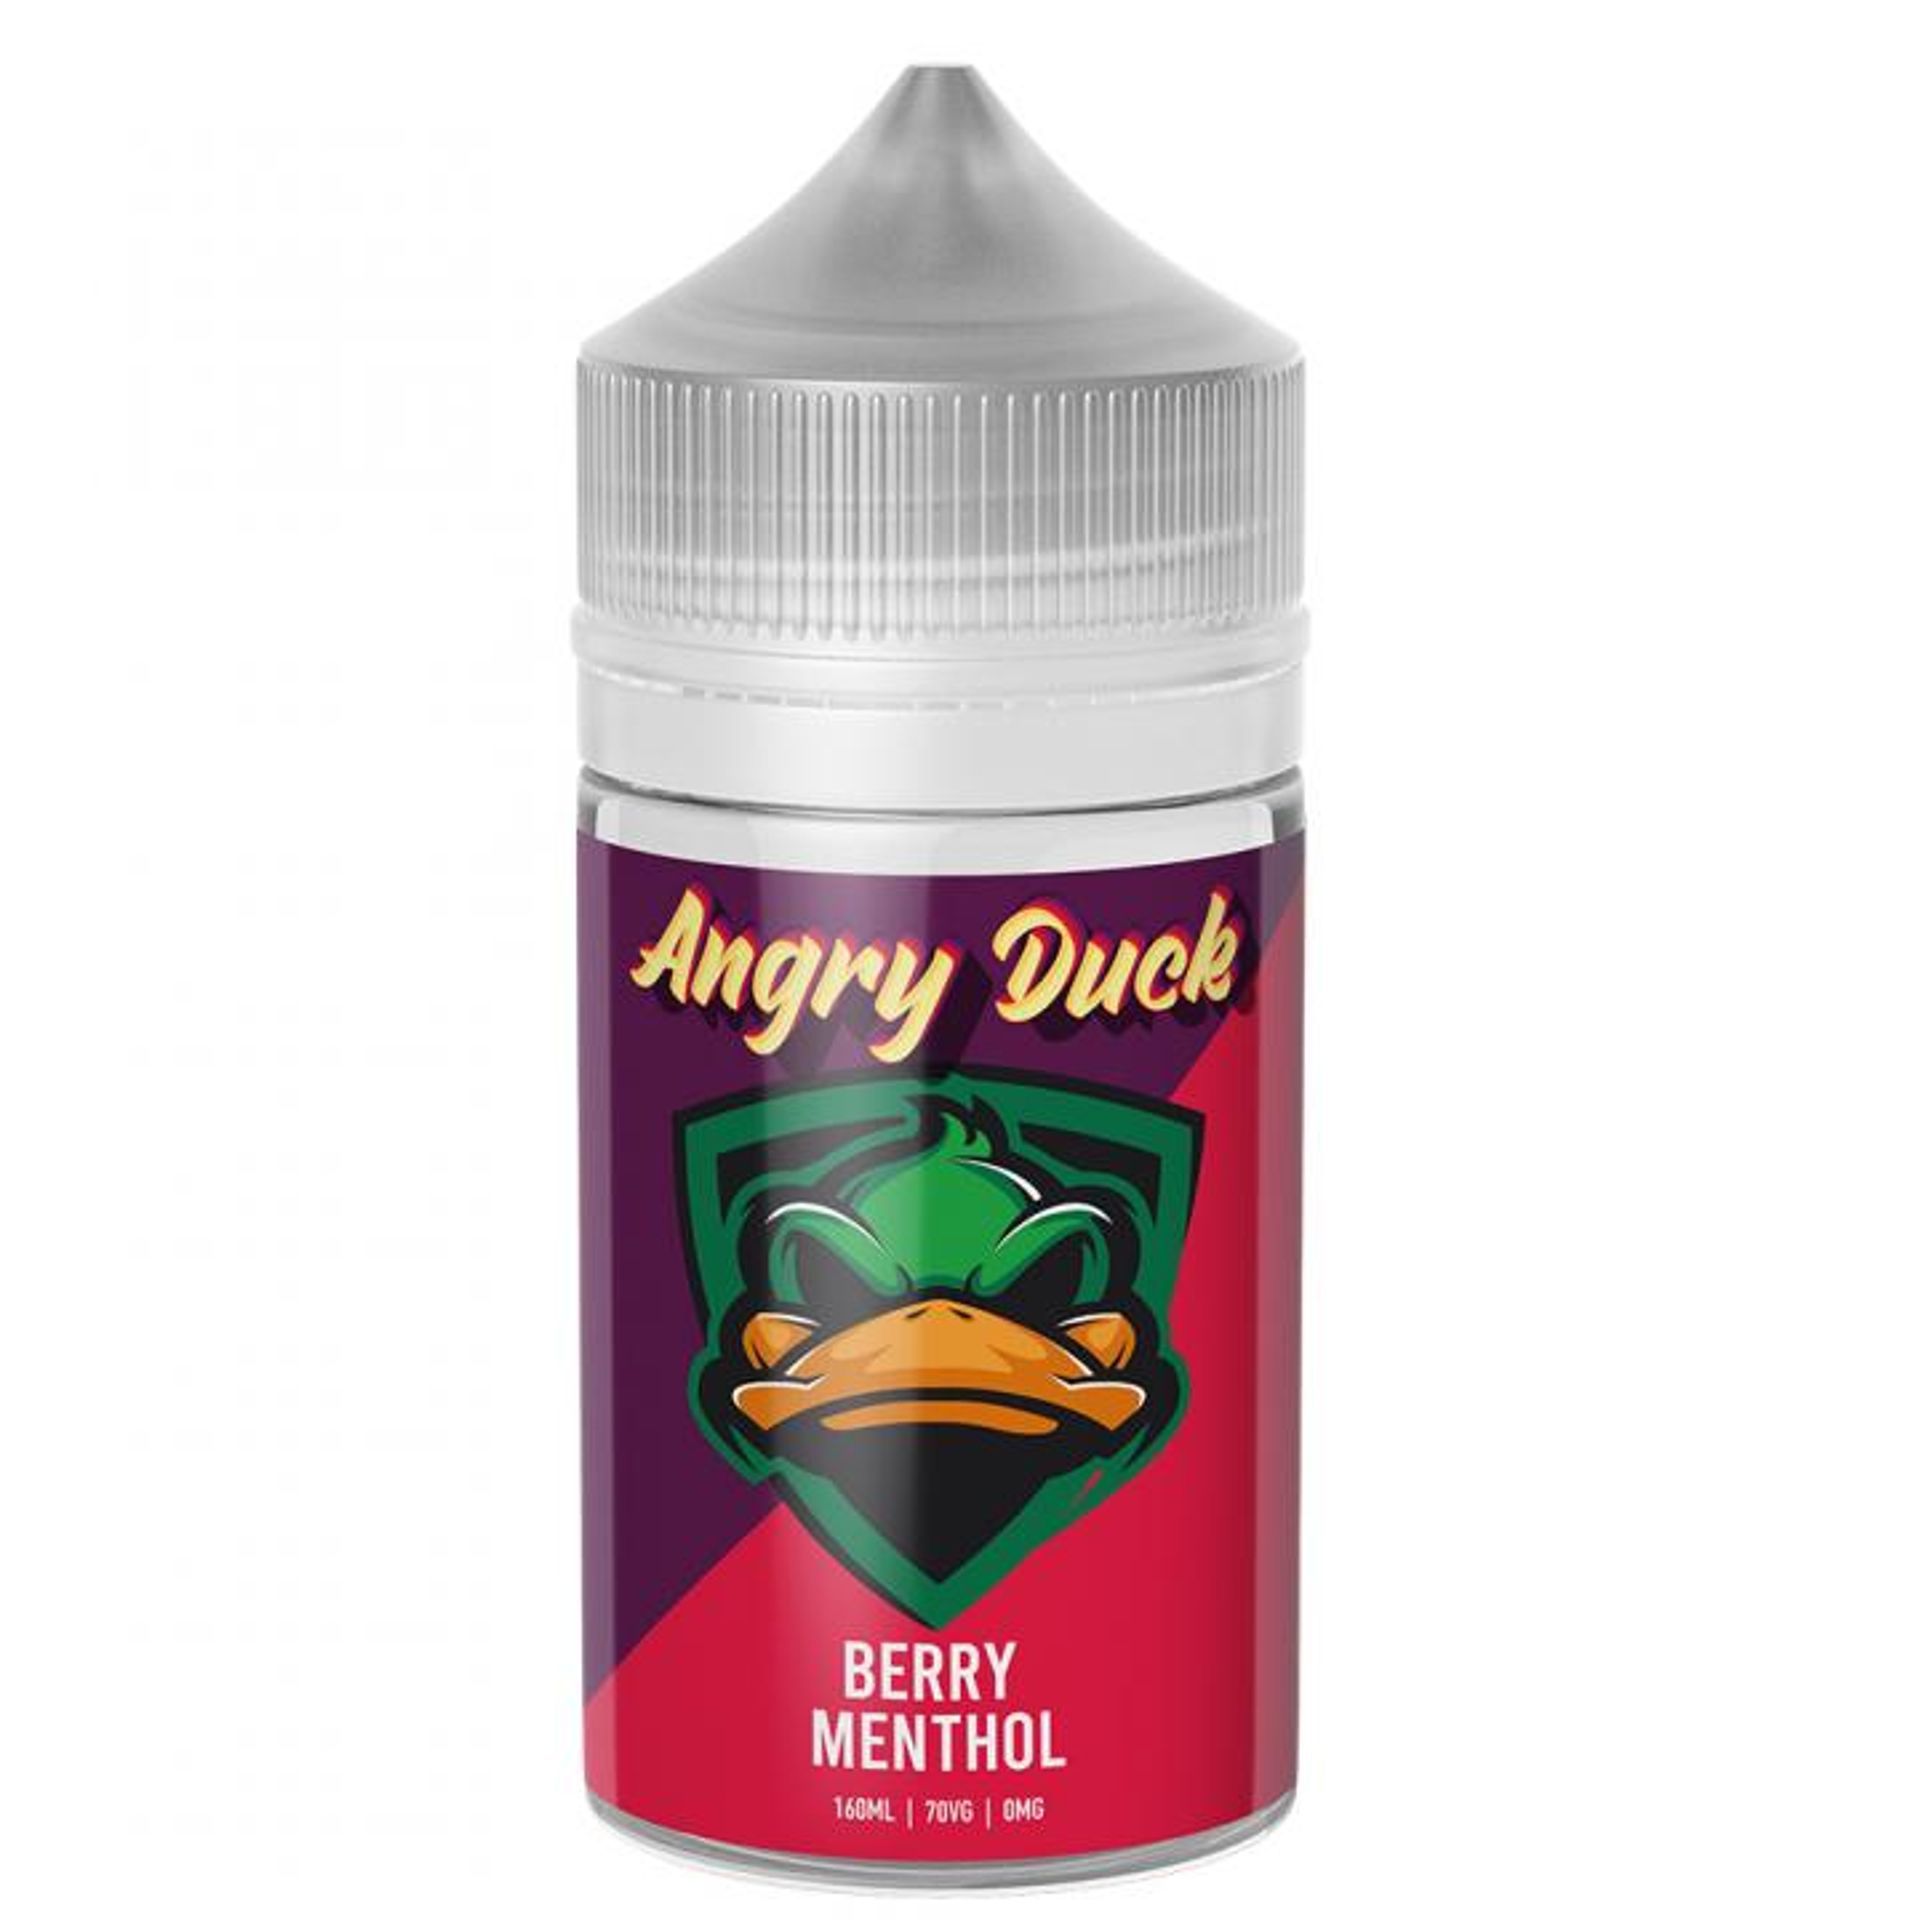 Image of Berry Menthol by Angry Duck